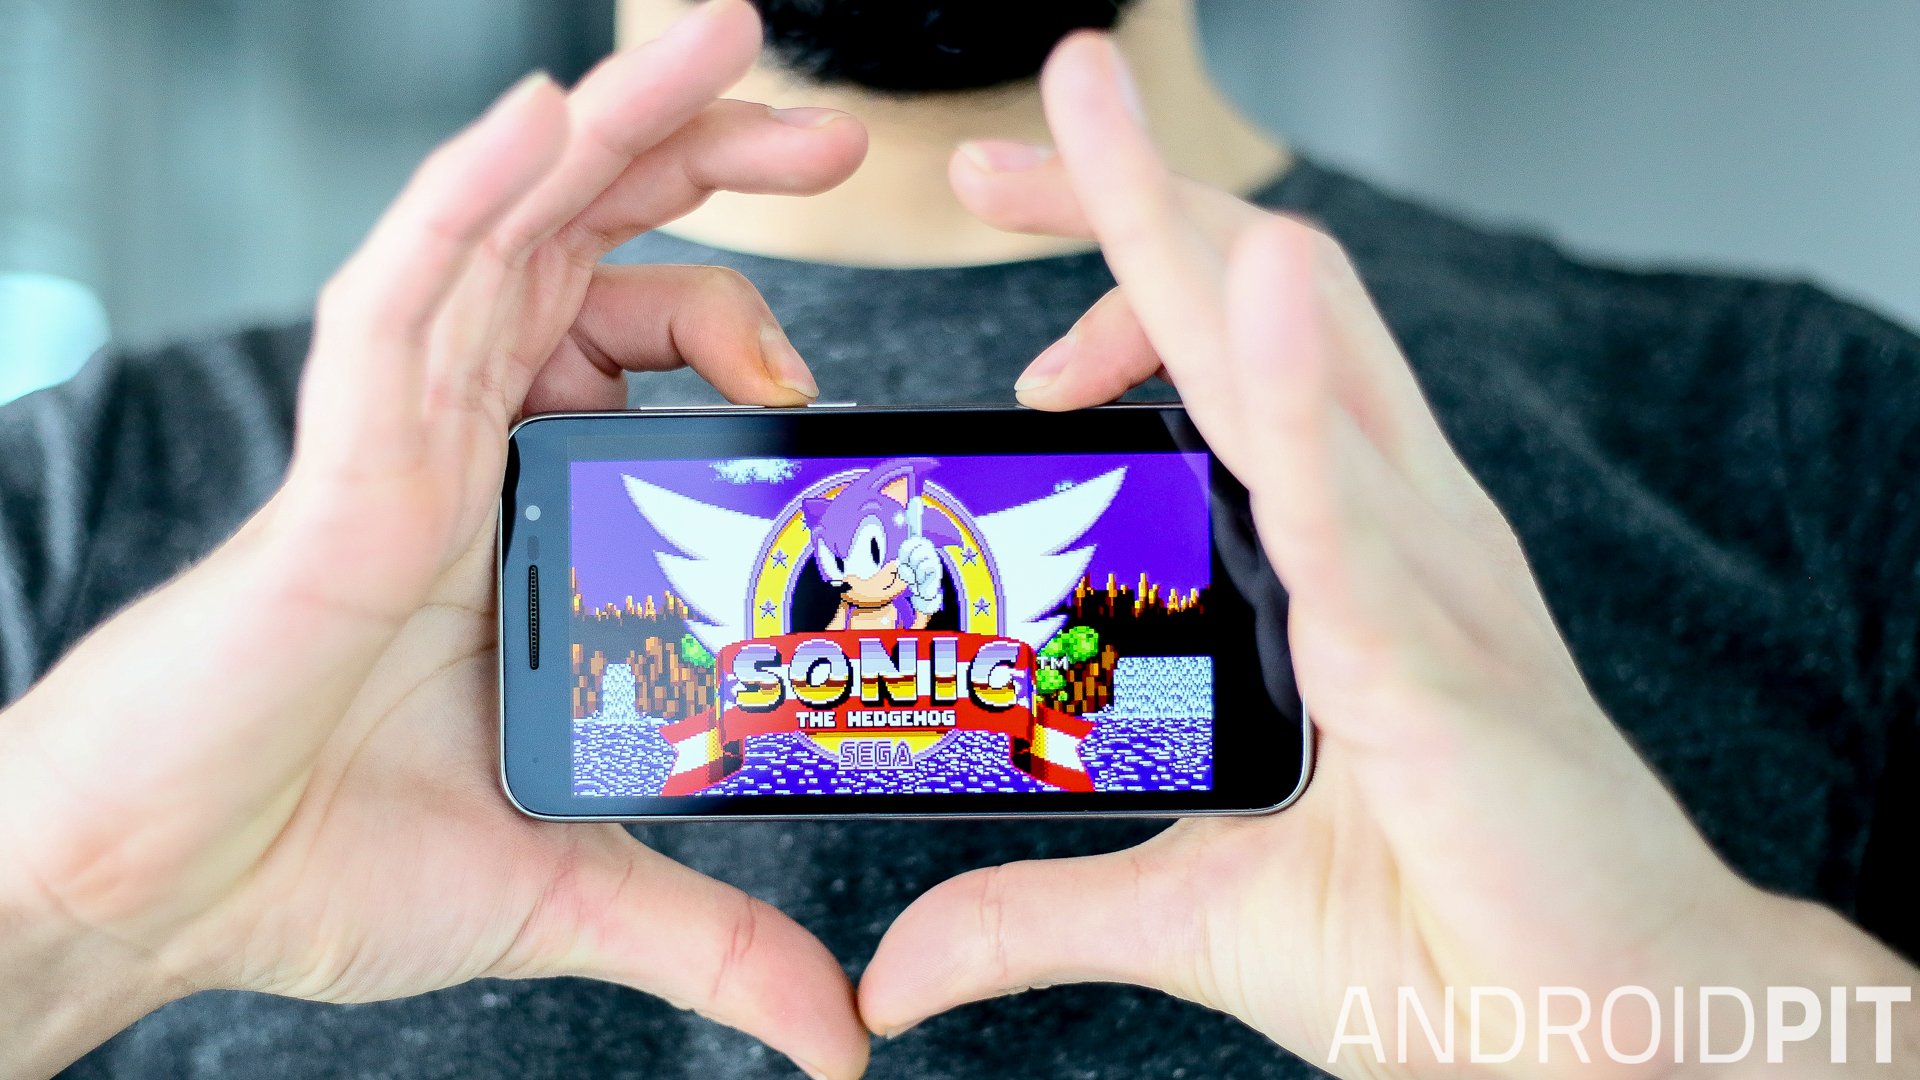 We want your opinion: what is the best Android game of 2015?